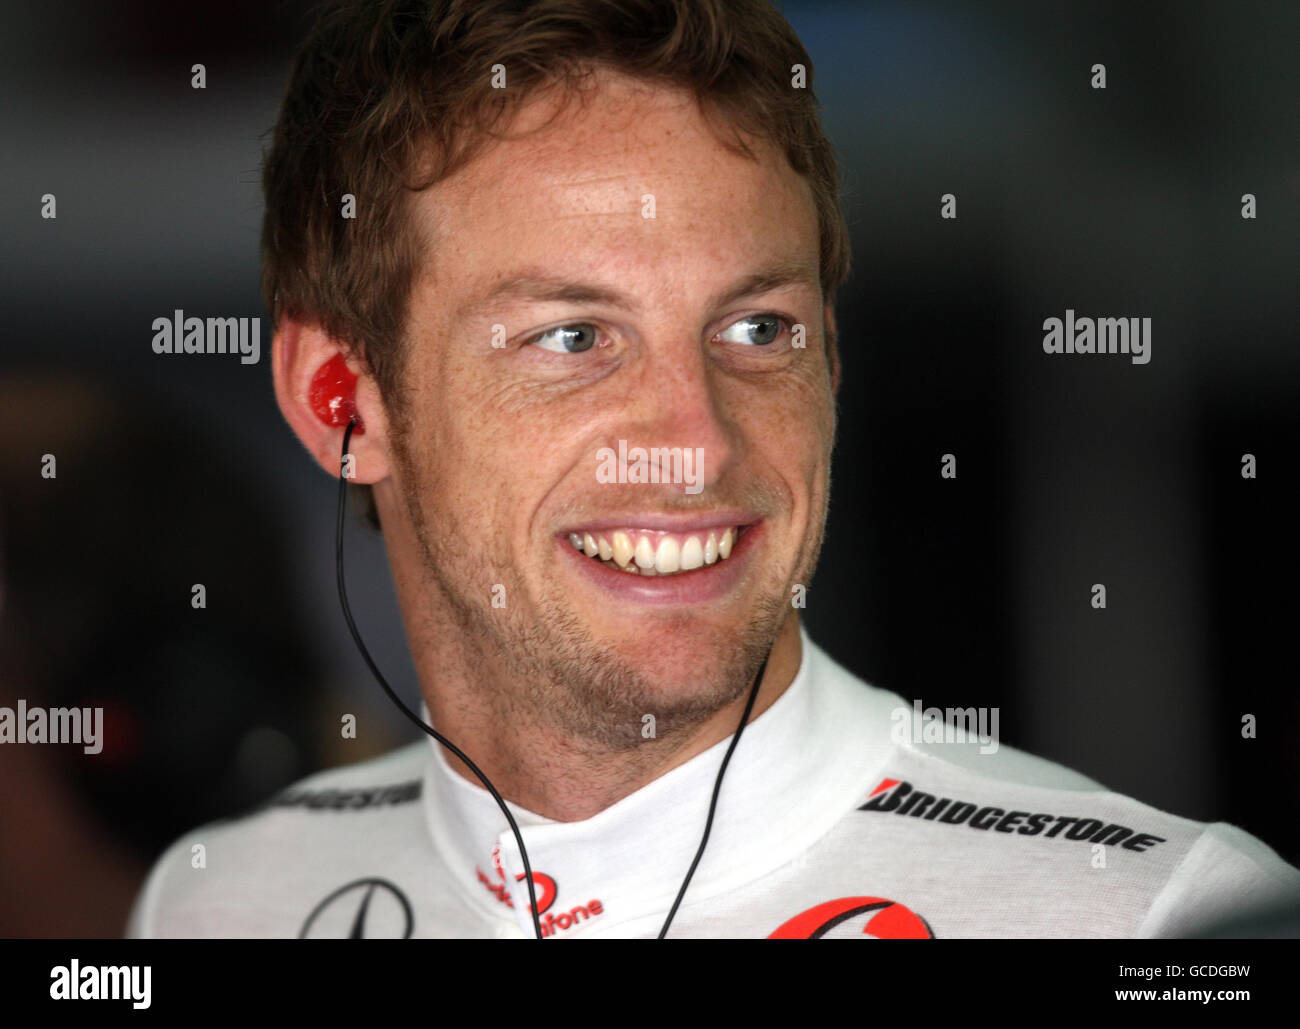 McLaren driver Jenson Button in the garage during the Practice Session at the Bahrain International Circuit in Sakhir, Bahrain. Stock Photo